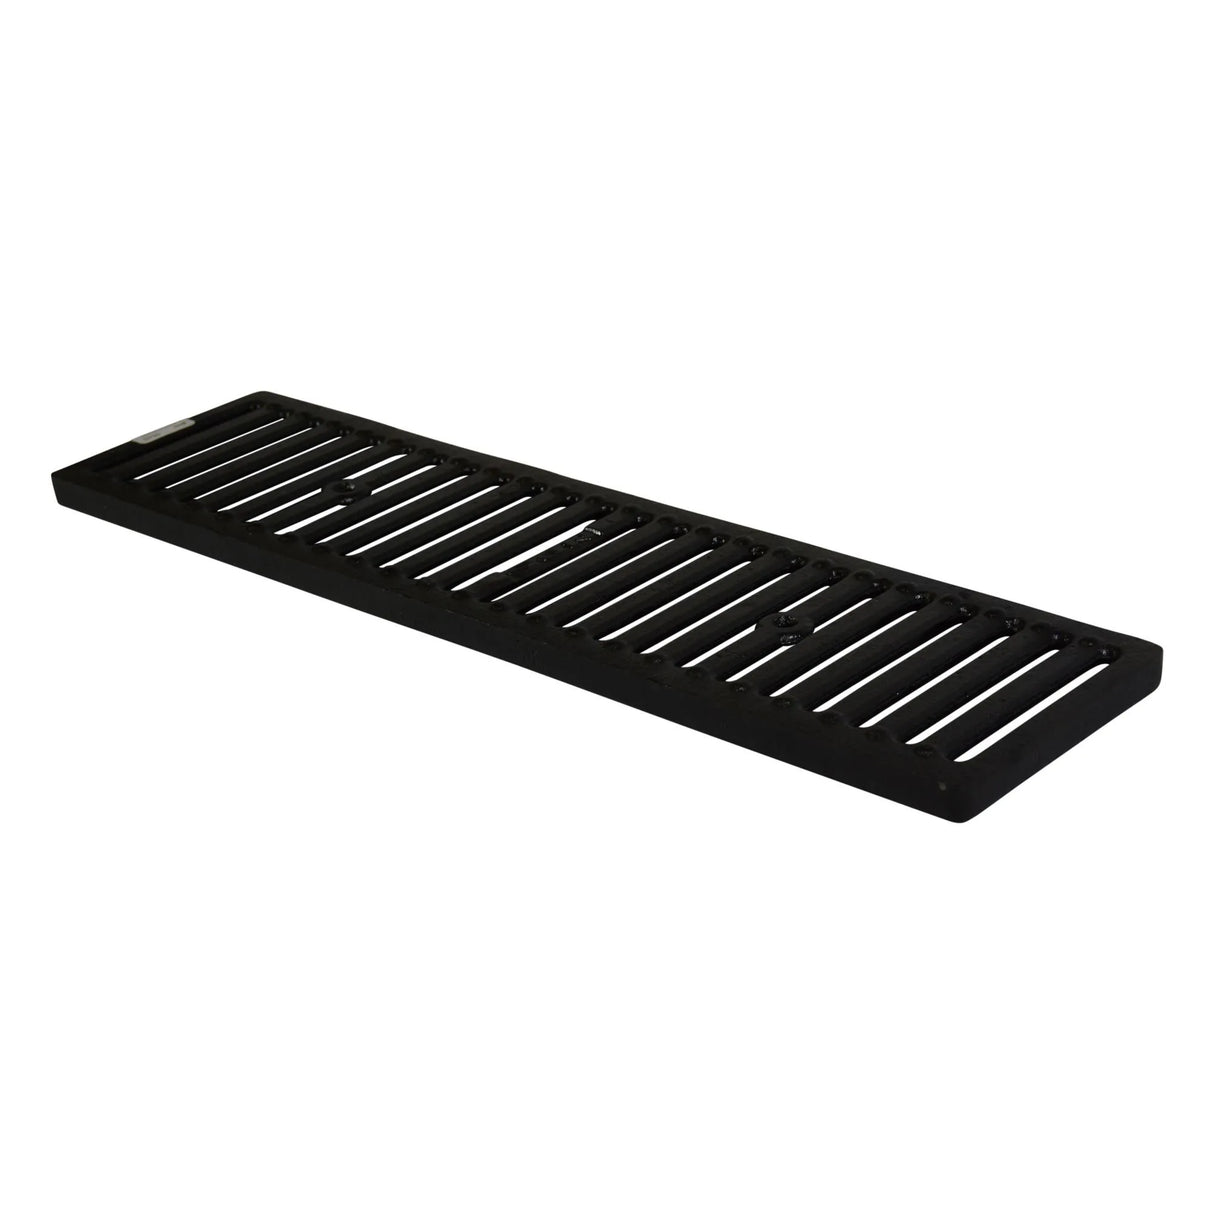 NDS - DS-232 - 2' Dura Slope Ductile Iron Channel Grate